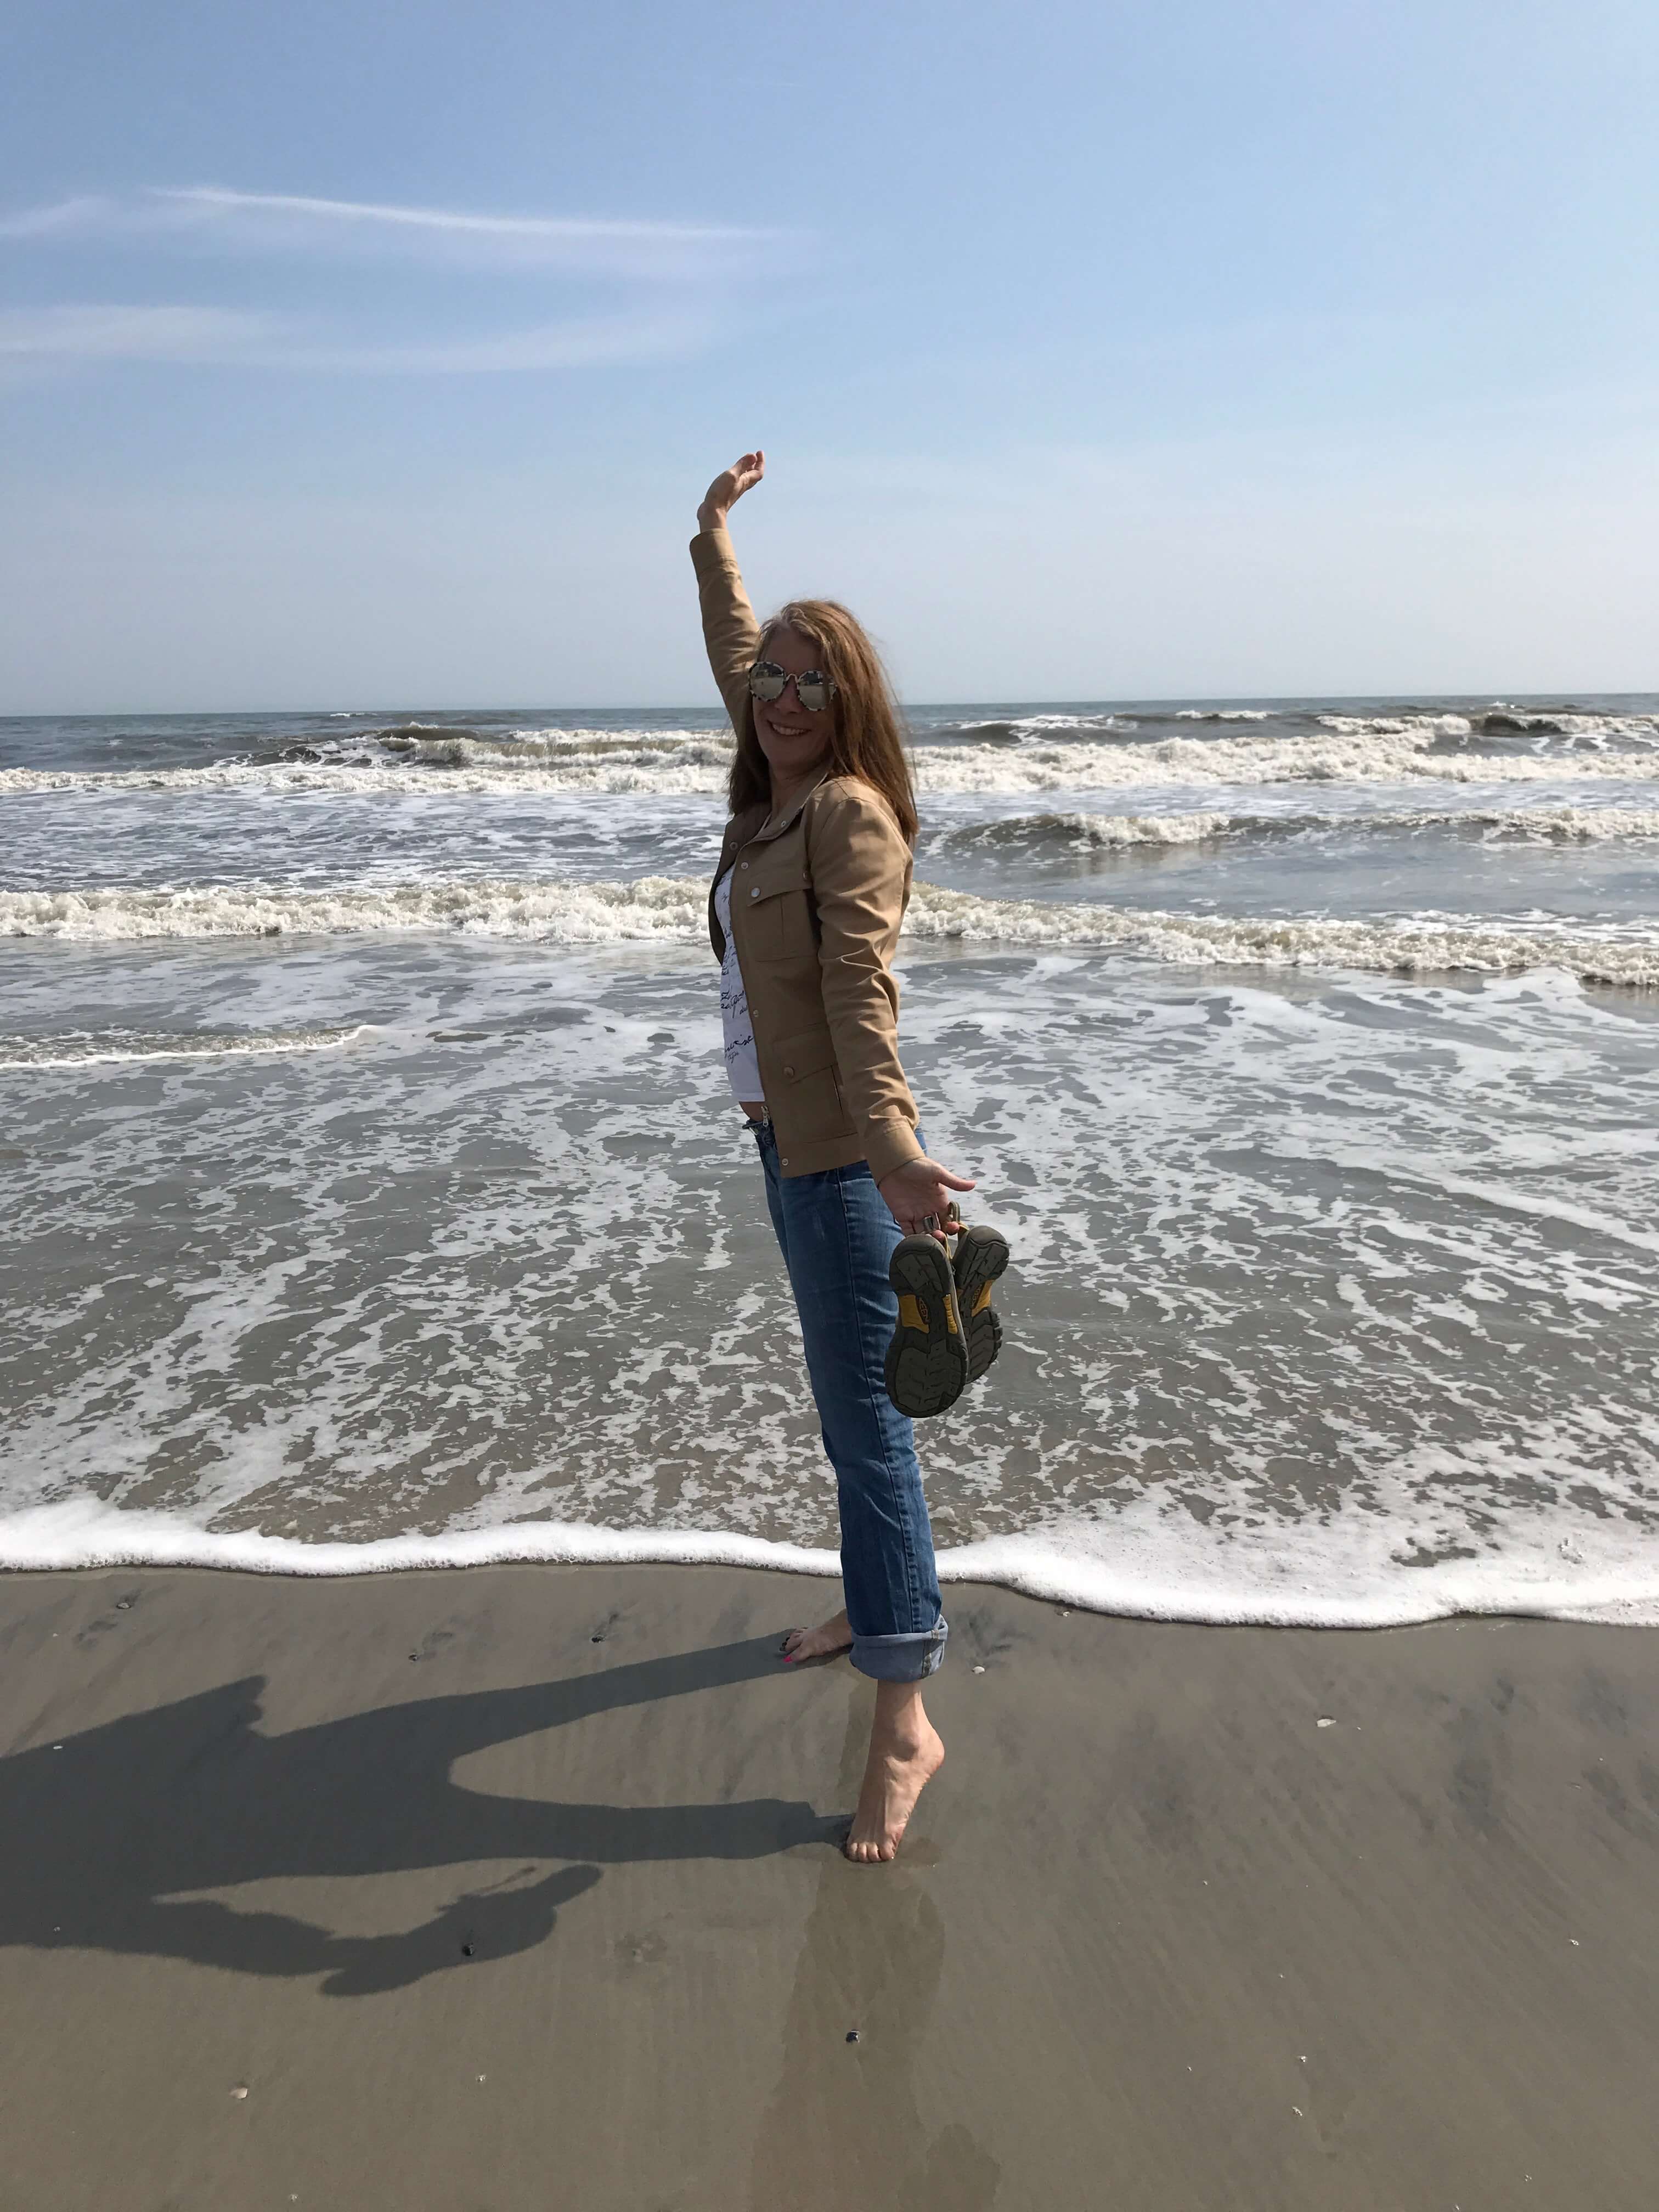 Audrey standing at the beach on tippy toes waving